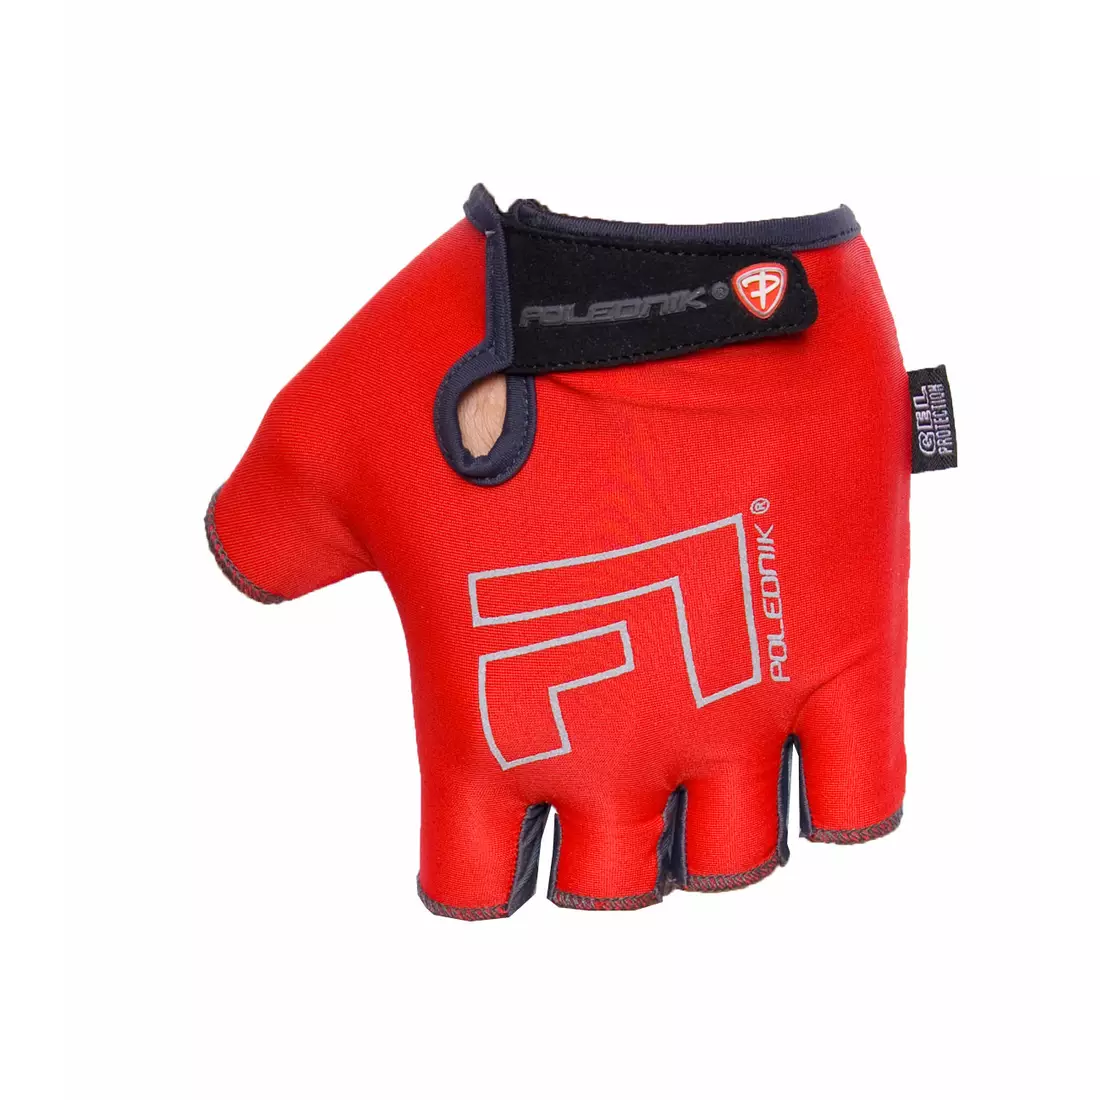 POLEDNIK F1 NEW14 red cycling gloves